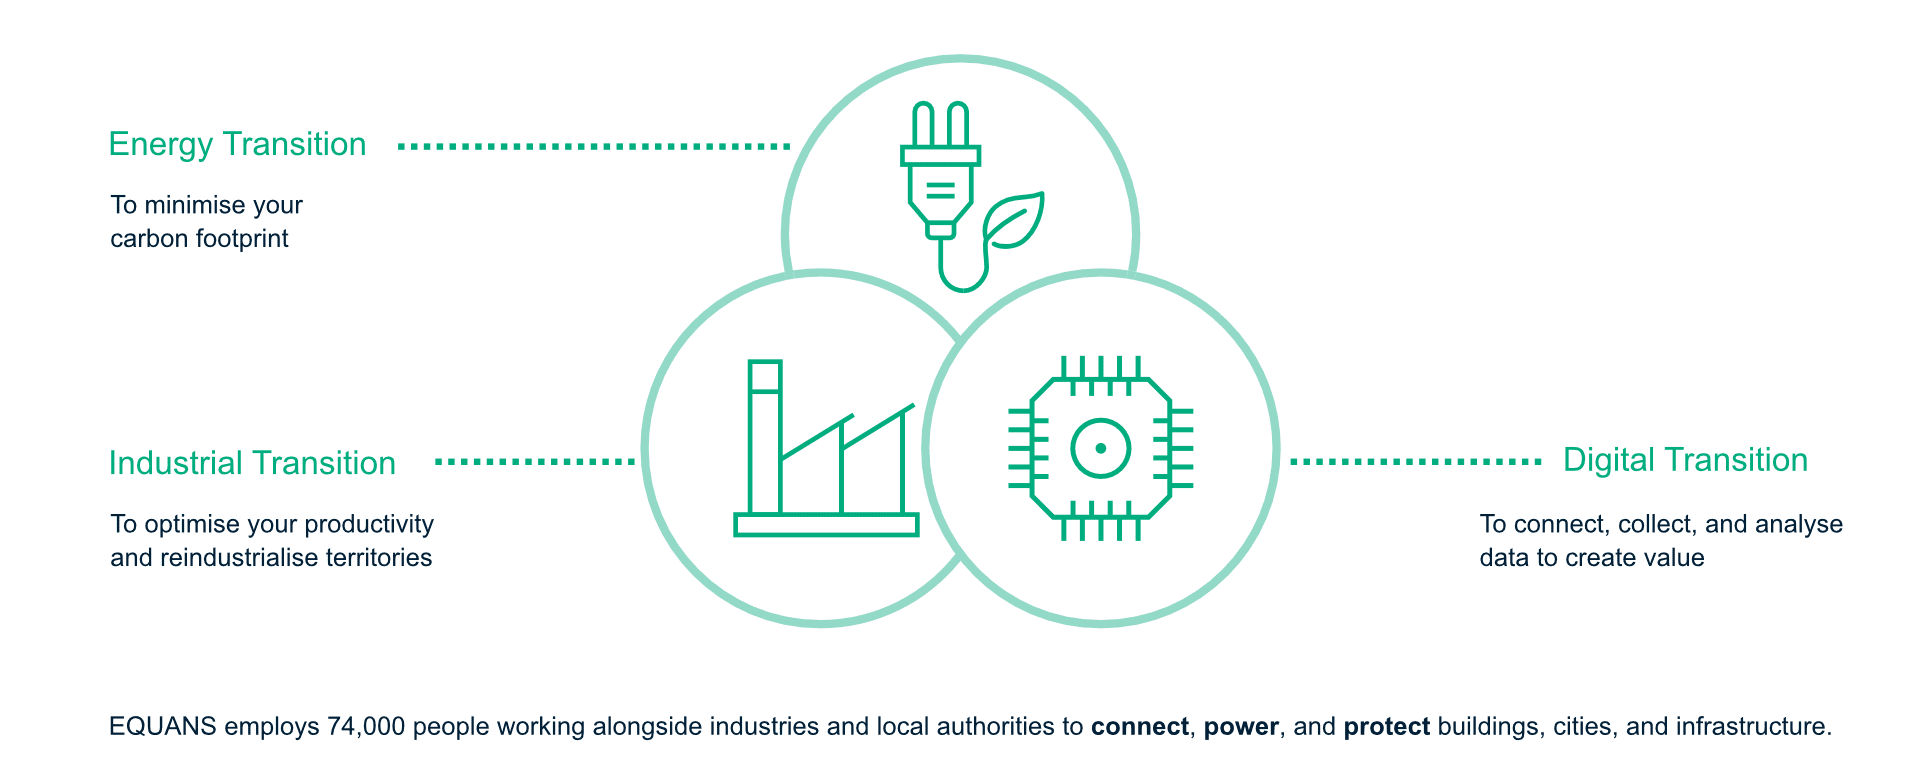 EQUANS is empowering transitions in three key areas: The Energy Transition (minimising your carbon footprint), The Industrial Transition (Optimising your productivitry and reindustrialising territories), and the Digital Transition (Connecting, collecting, and analysing data to create value)